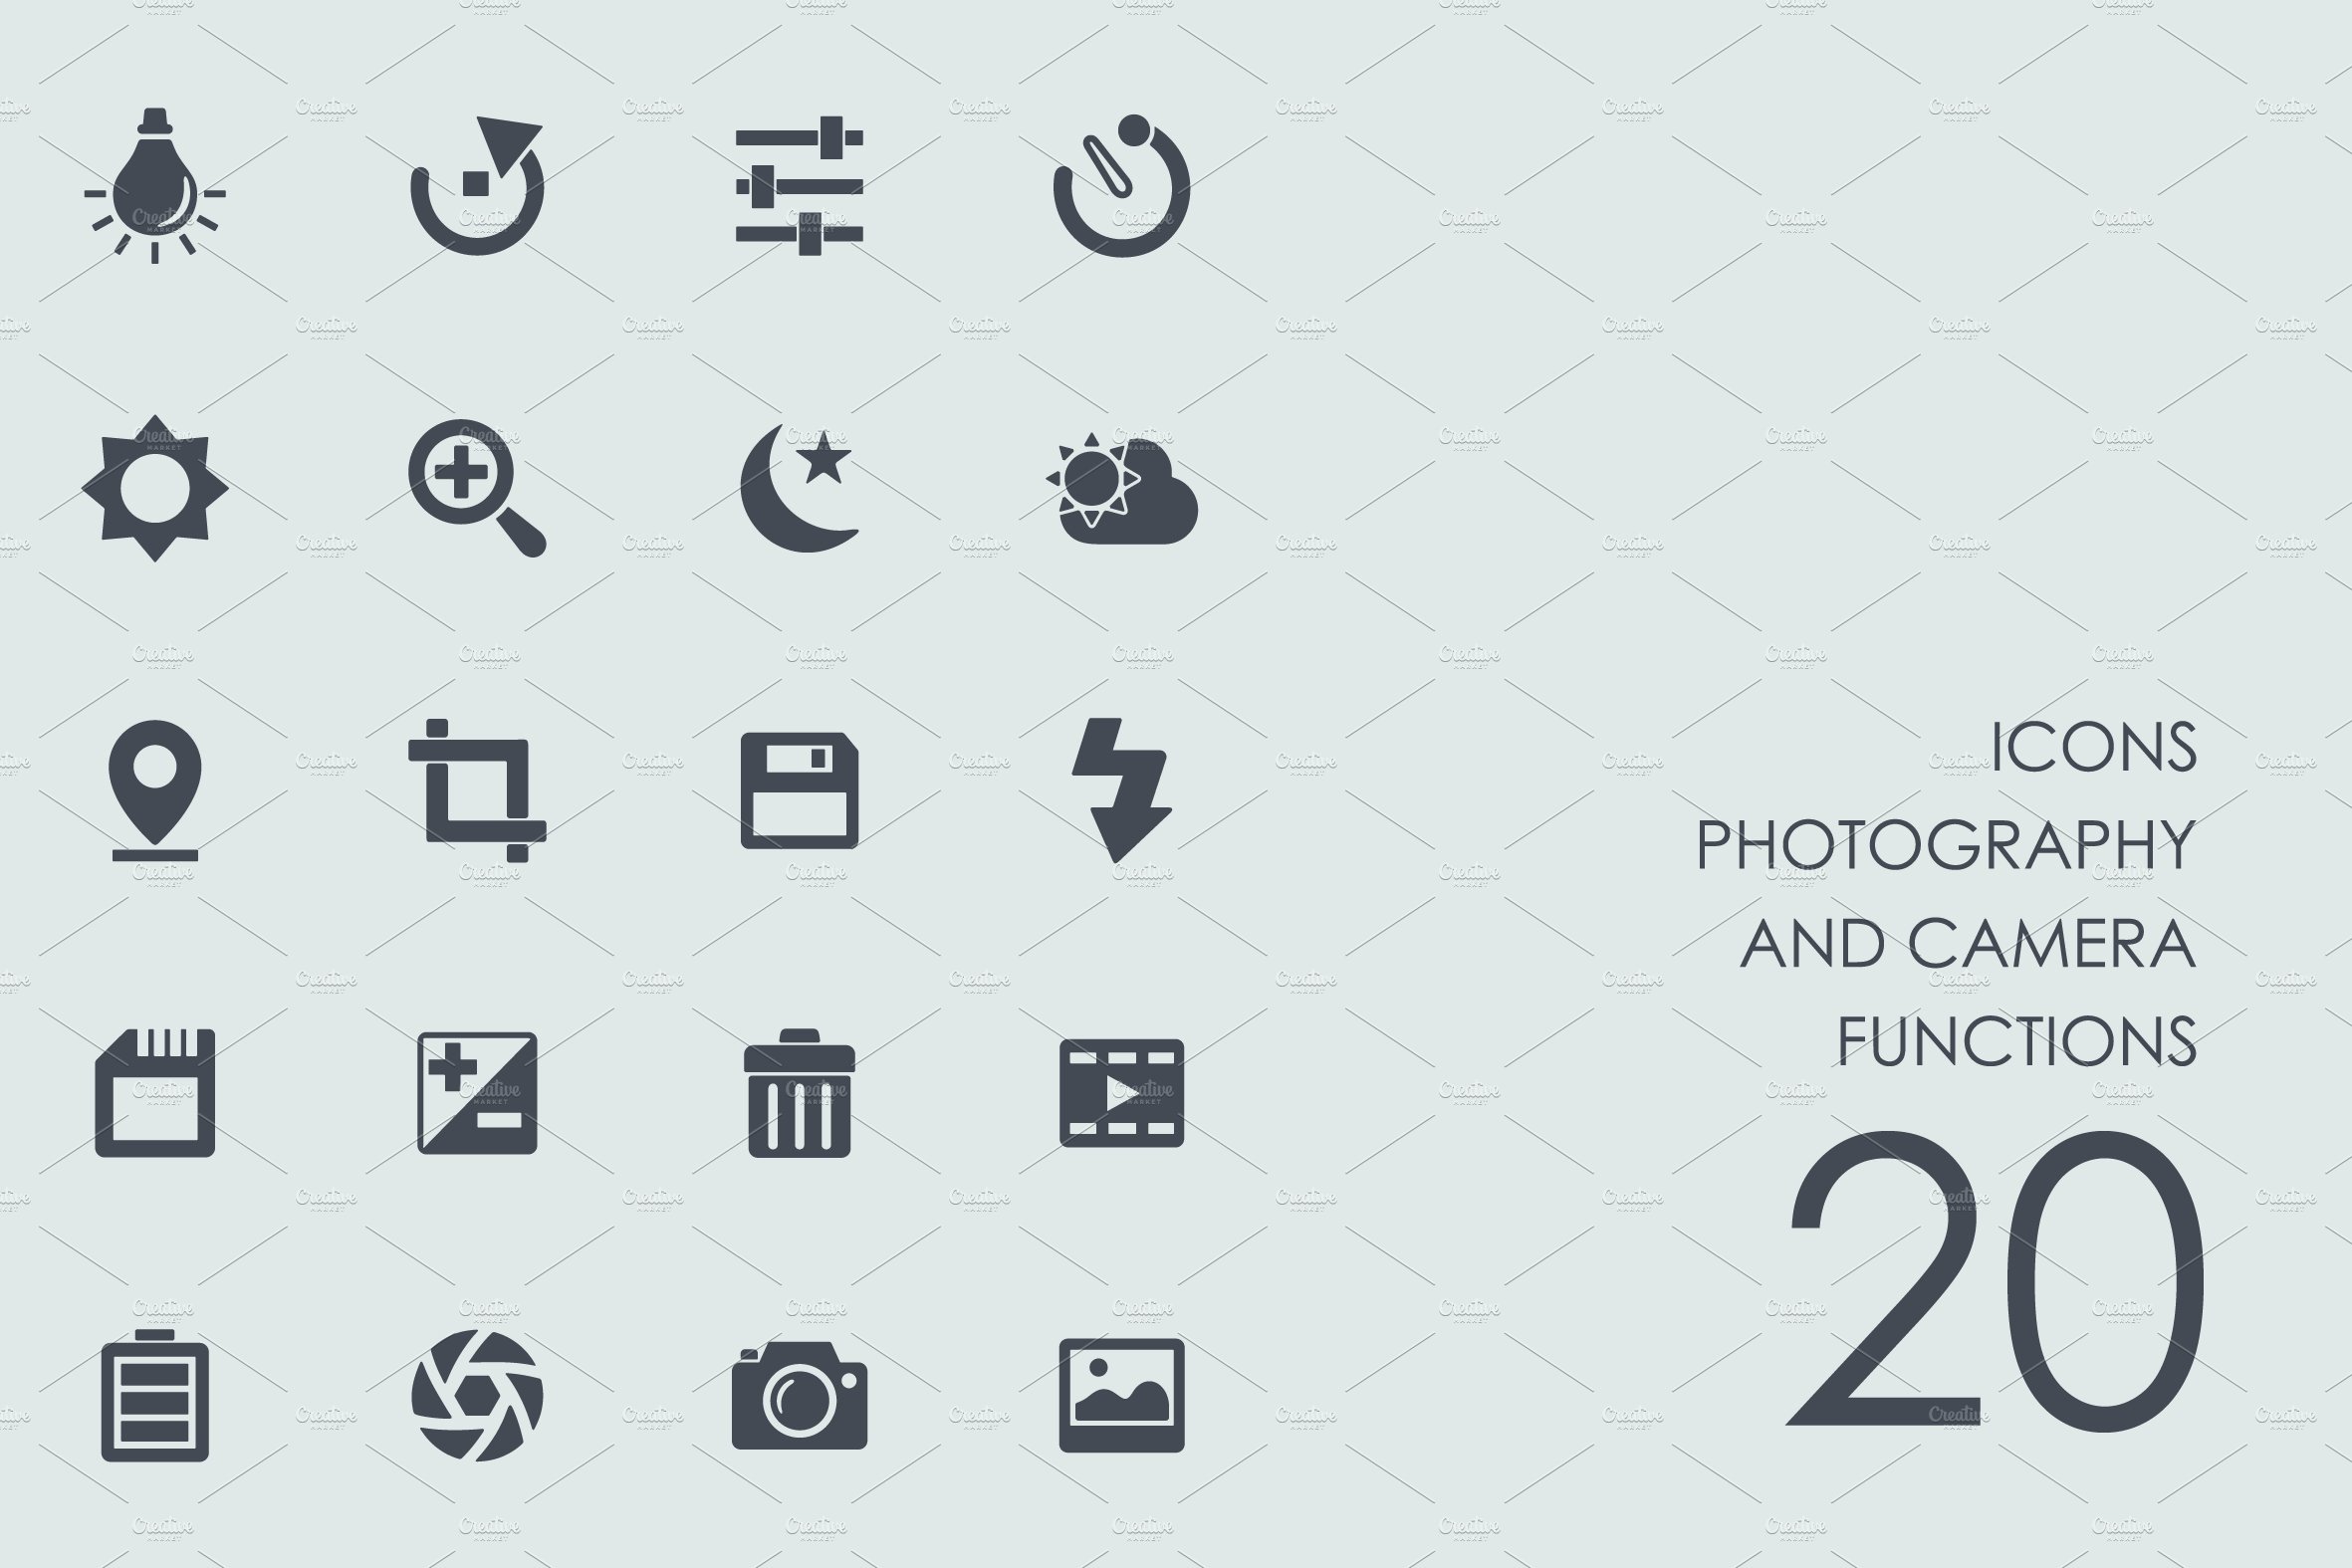 Photo and camera functions icons cover image.